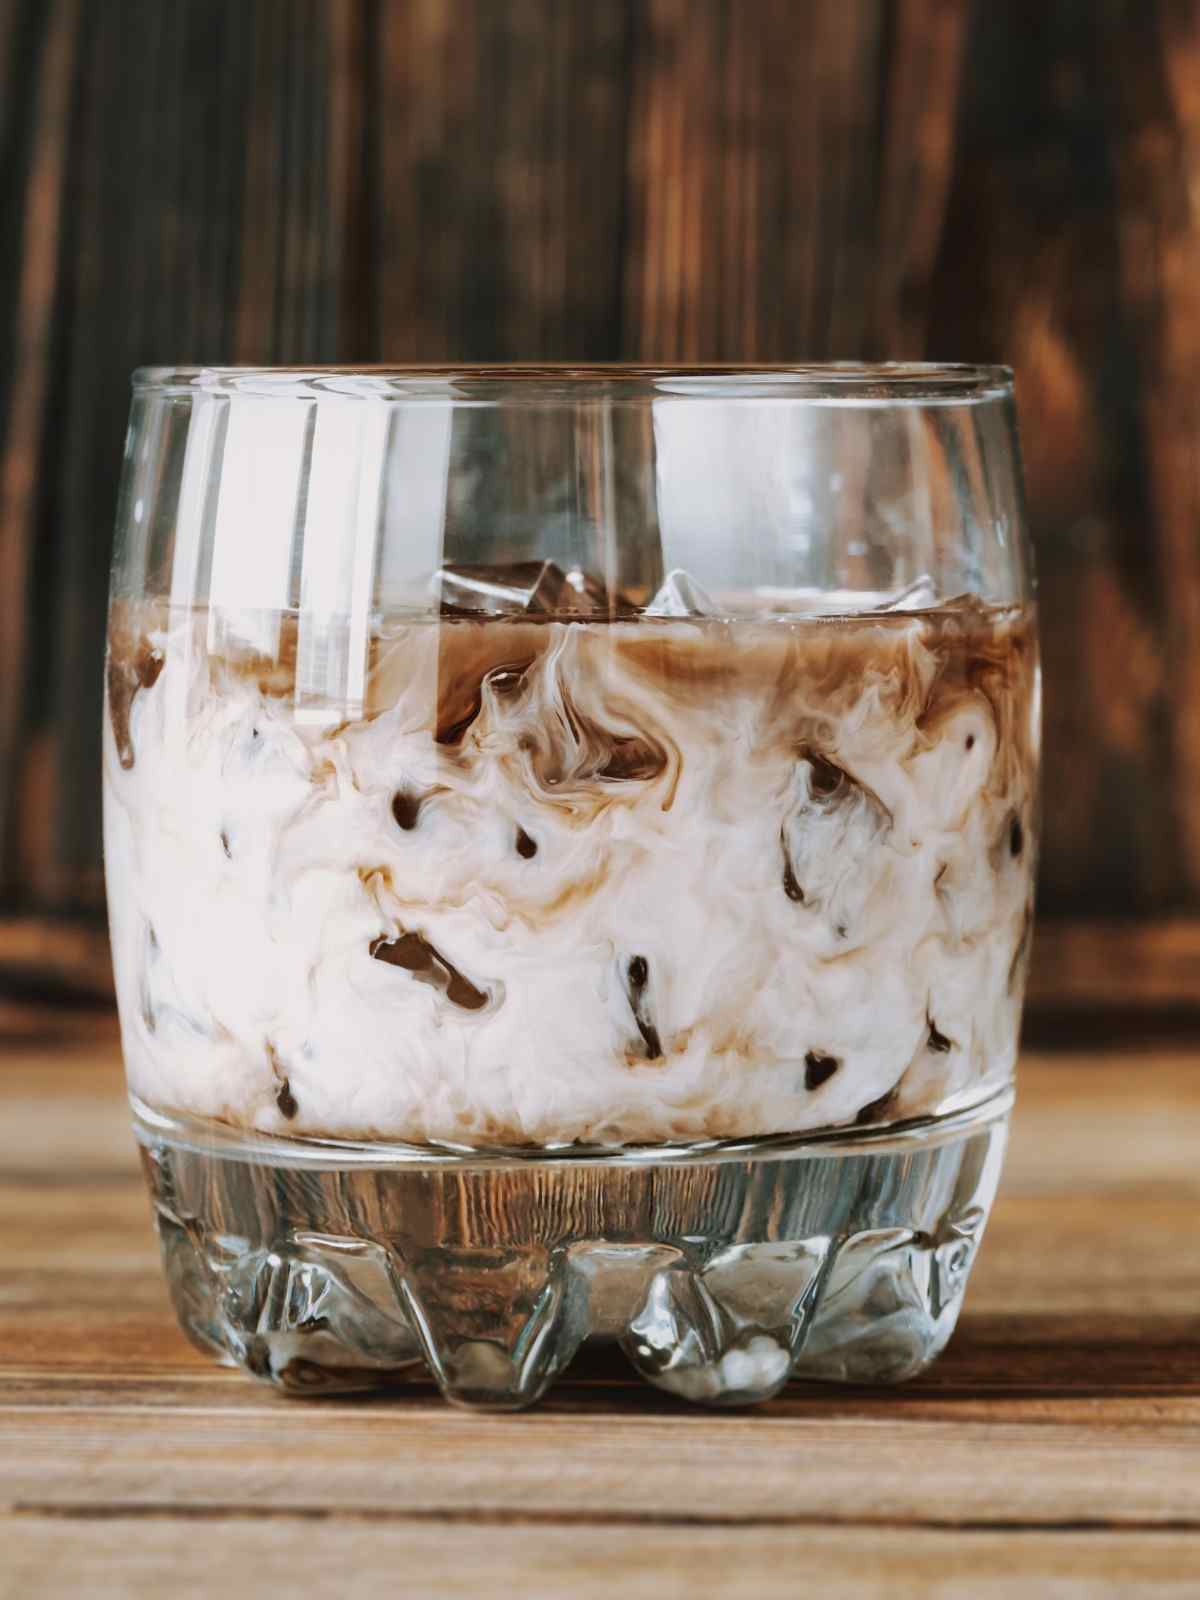 “Drunk” Your Cookies Into Tribe’s CBD Oreo White Russian